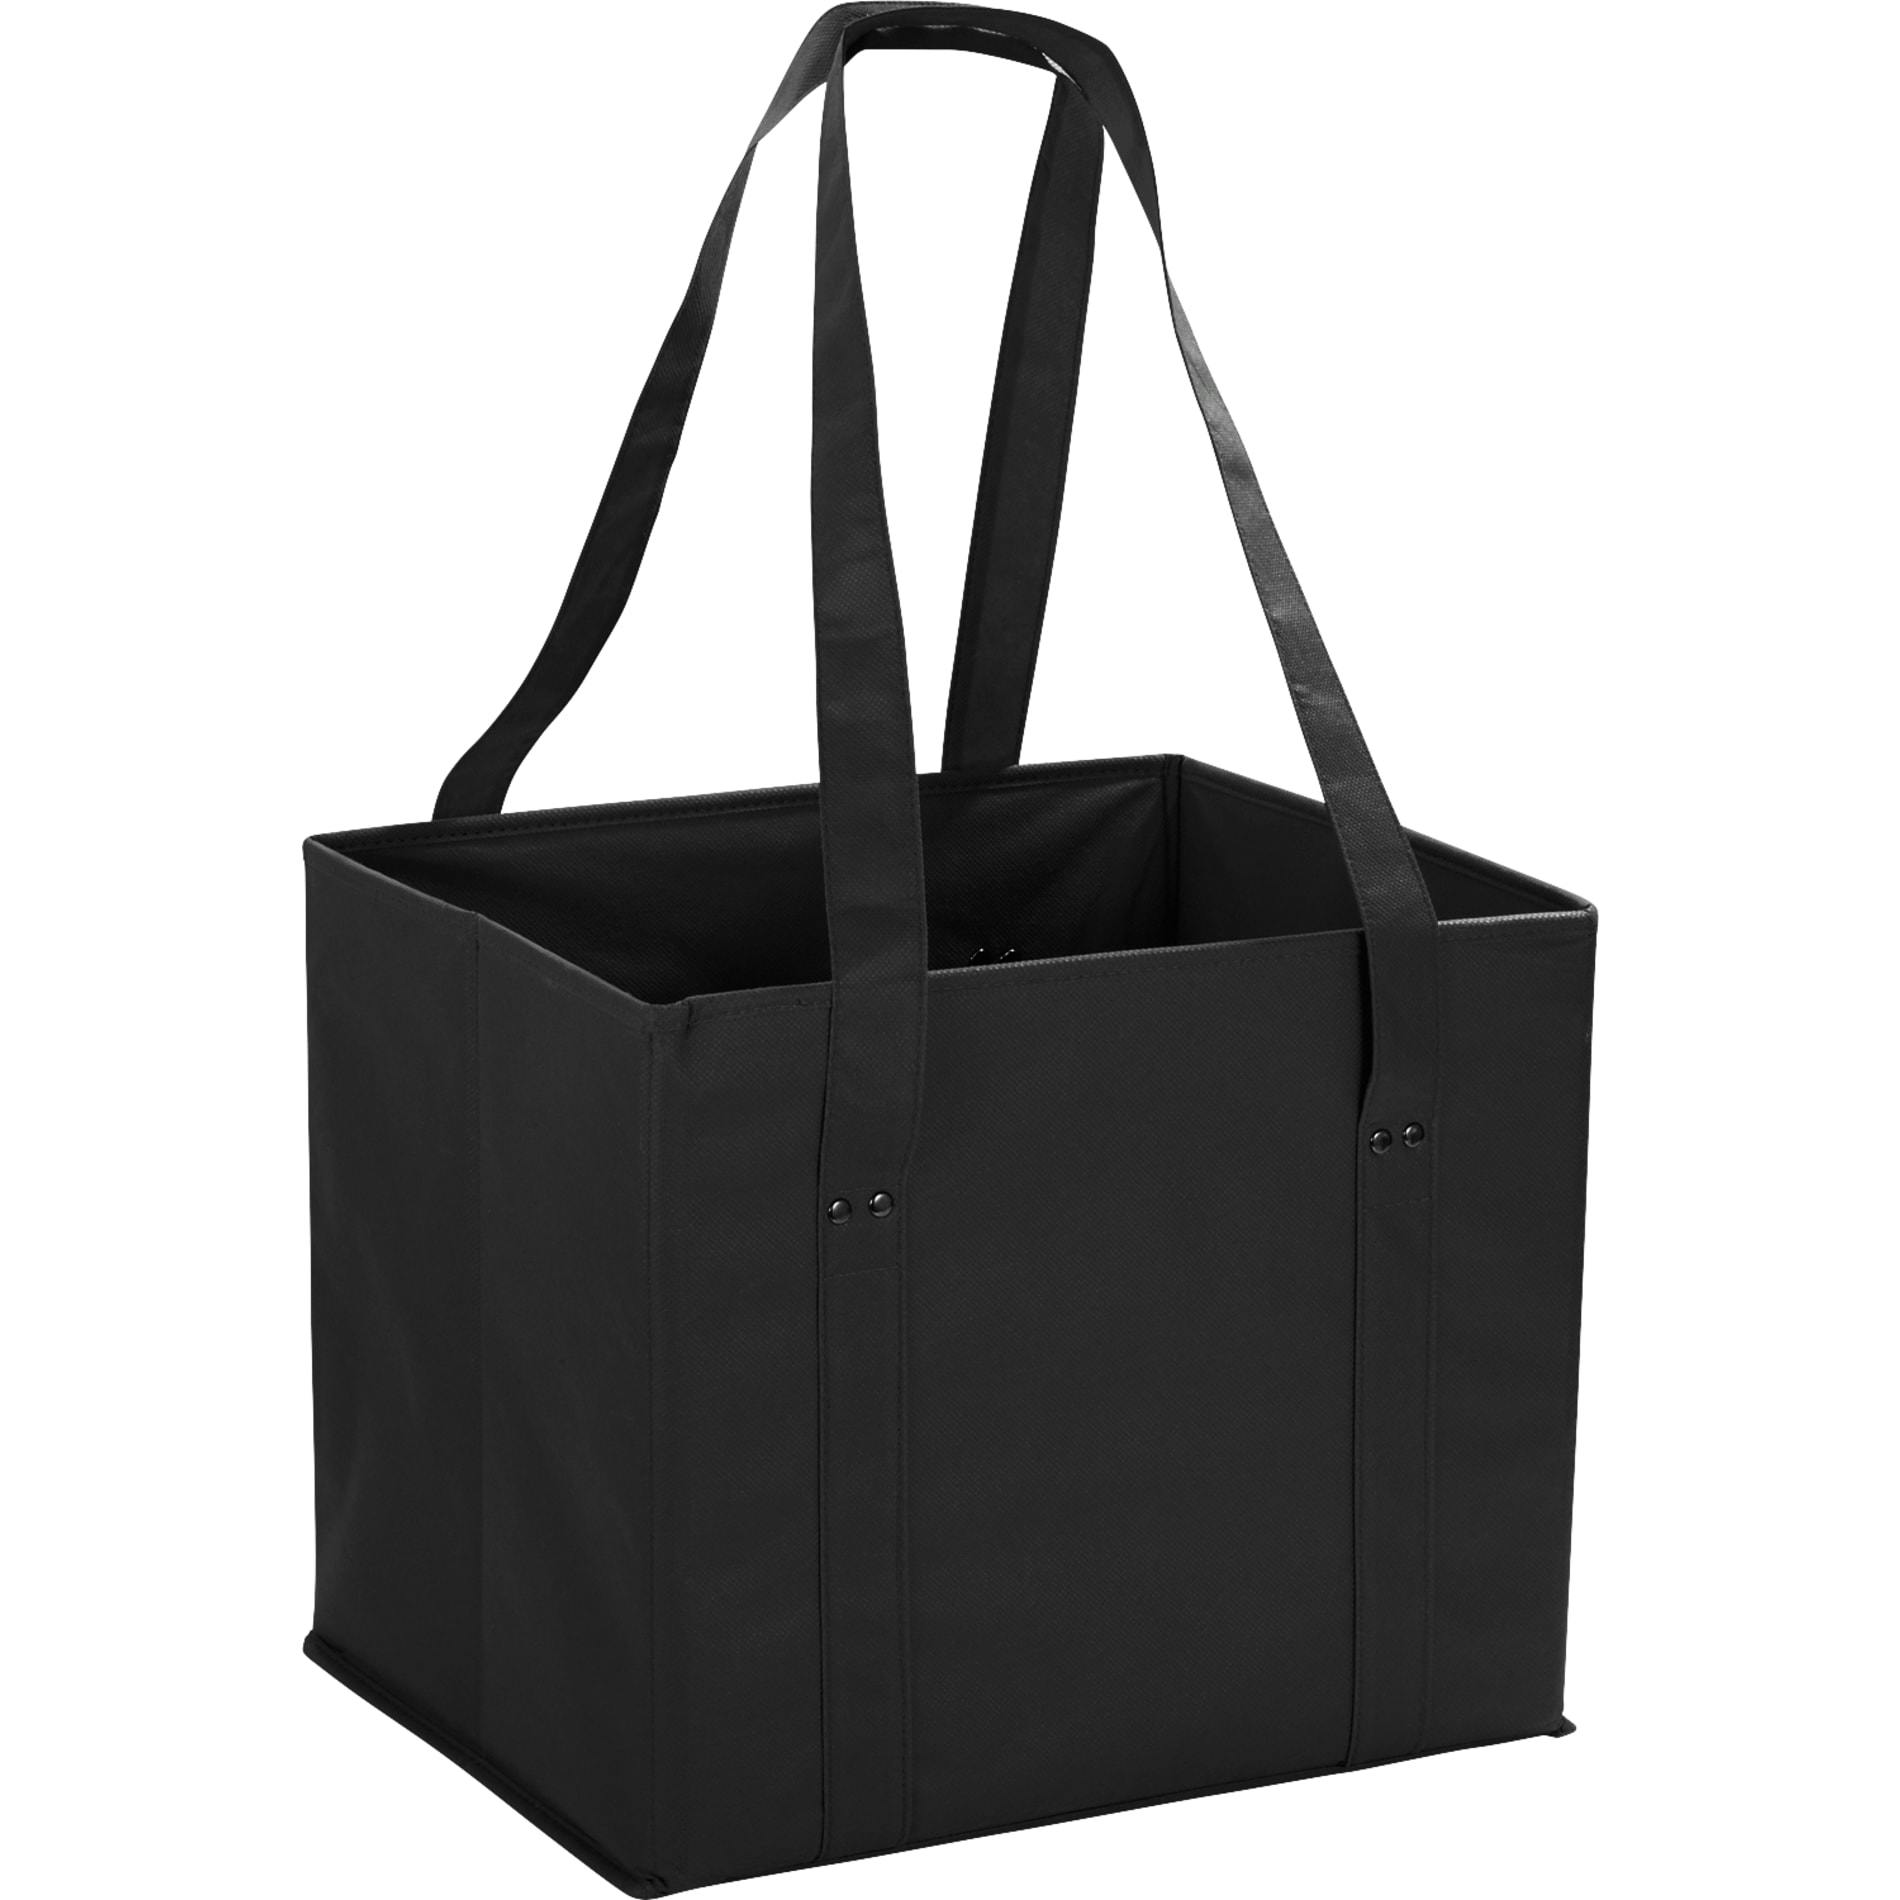 Collapsible Cube Storage Tote - additional Image 2